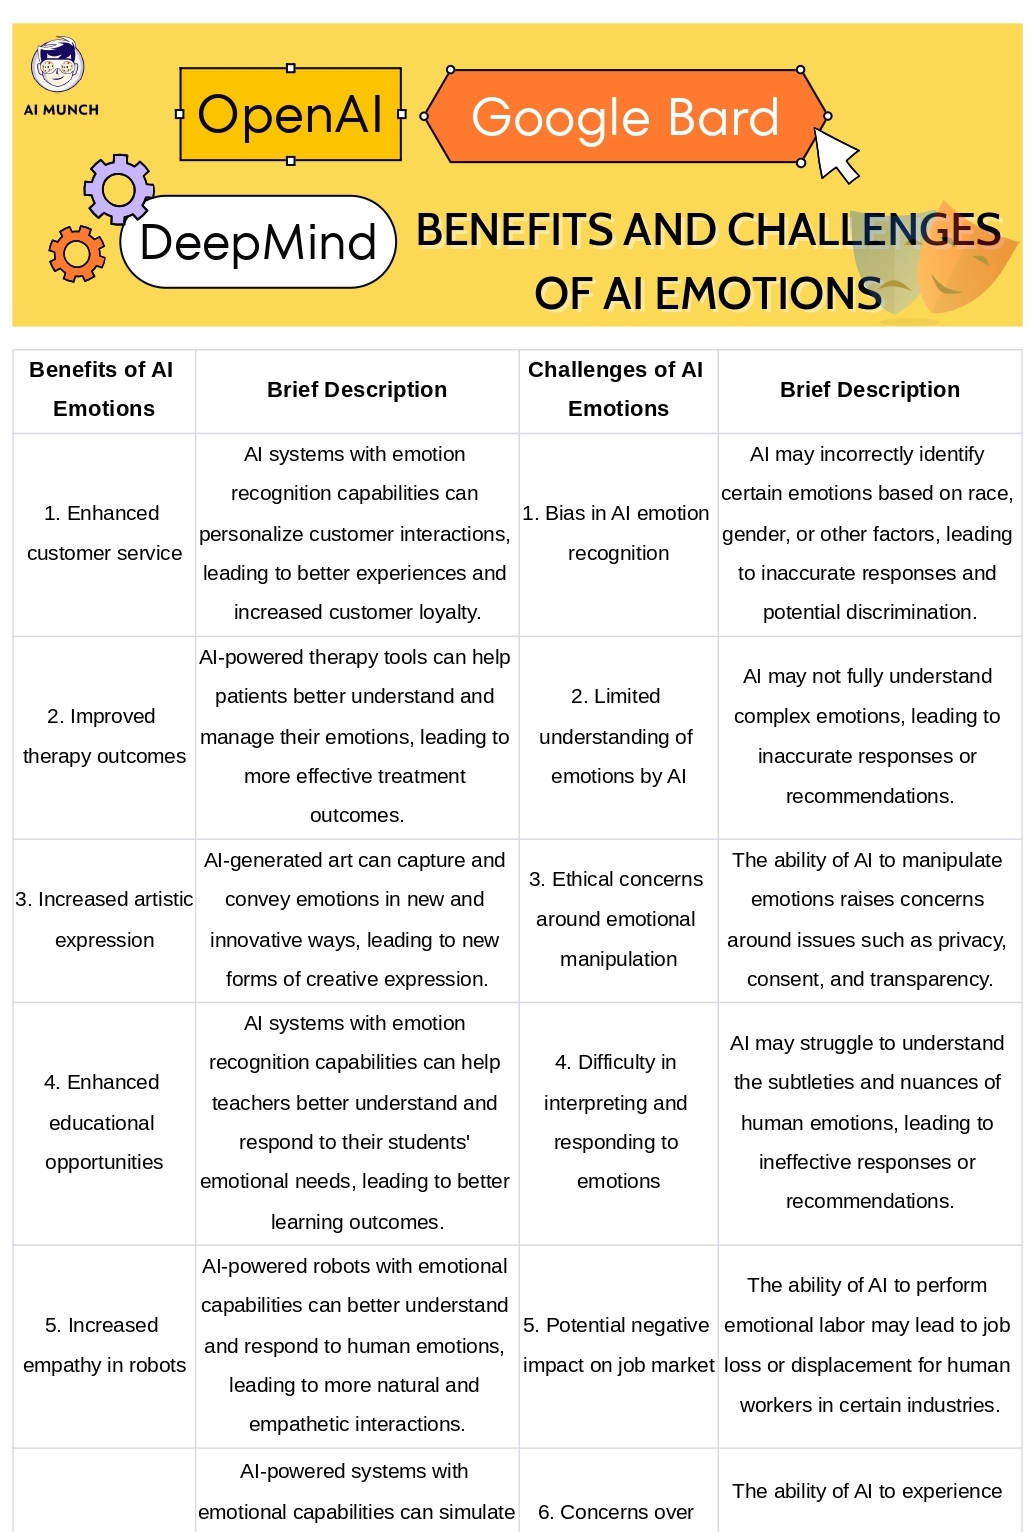 Benefits and challenges of emotion AI and ai and human emotions.